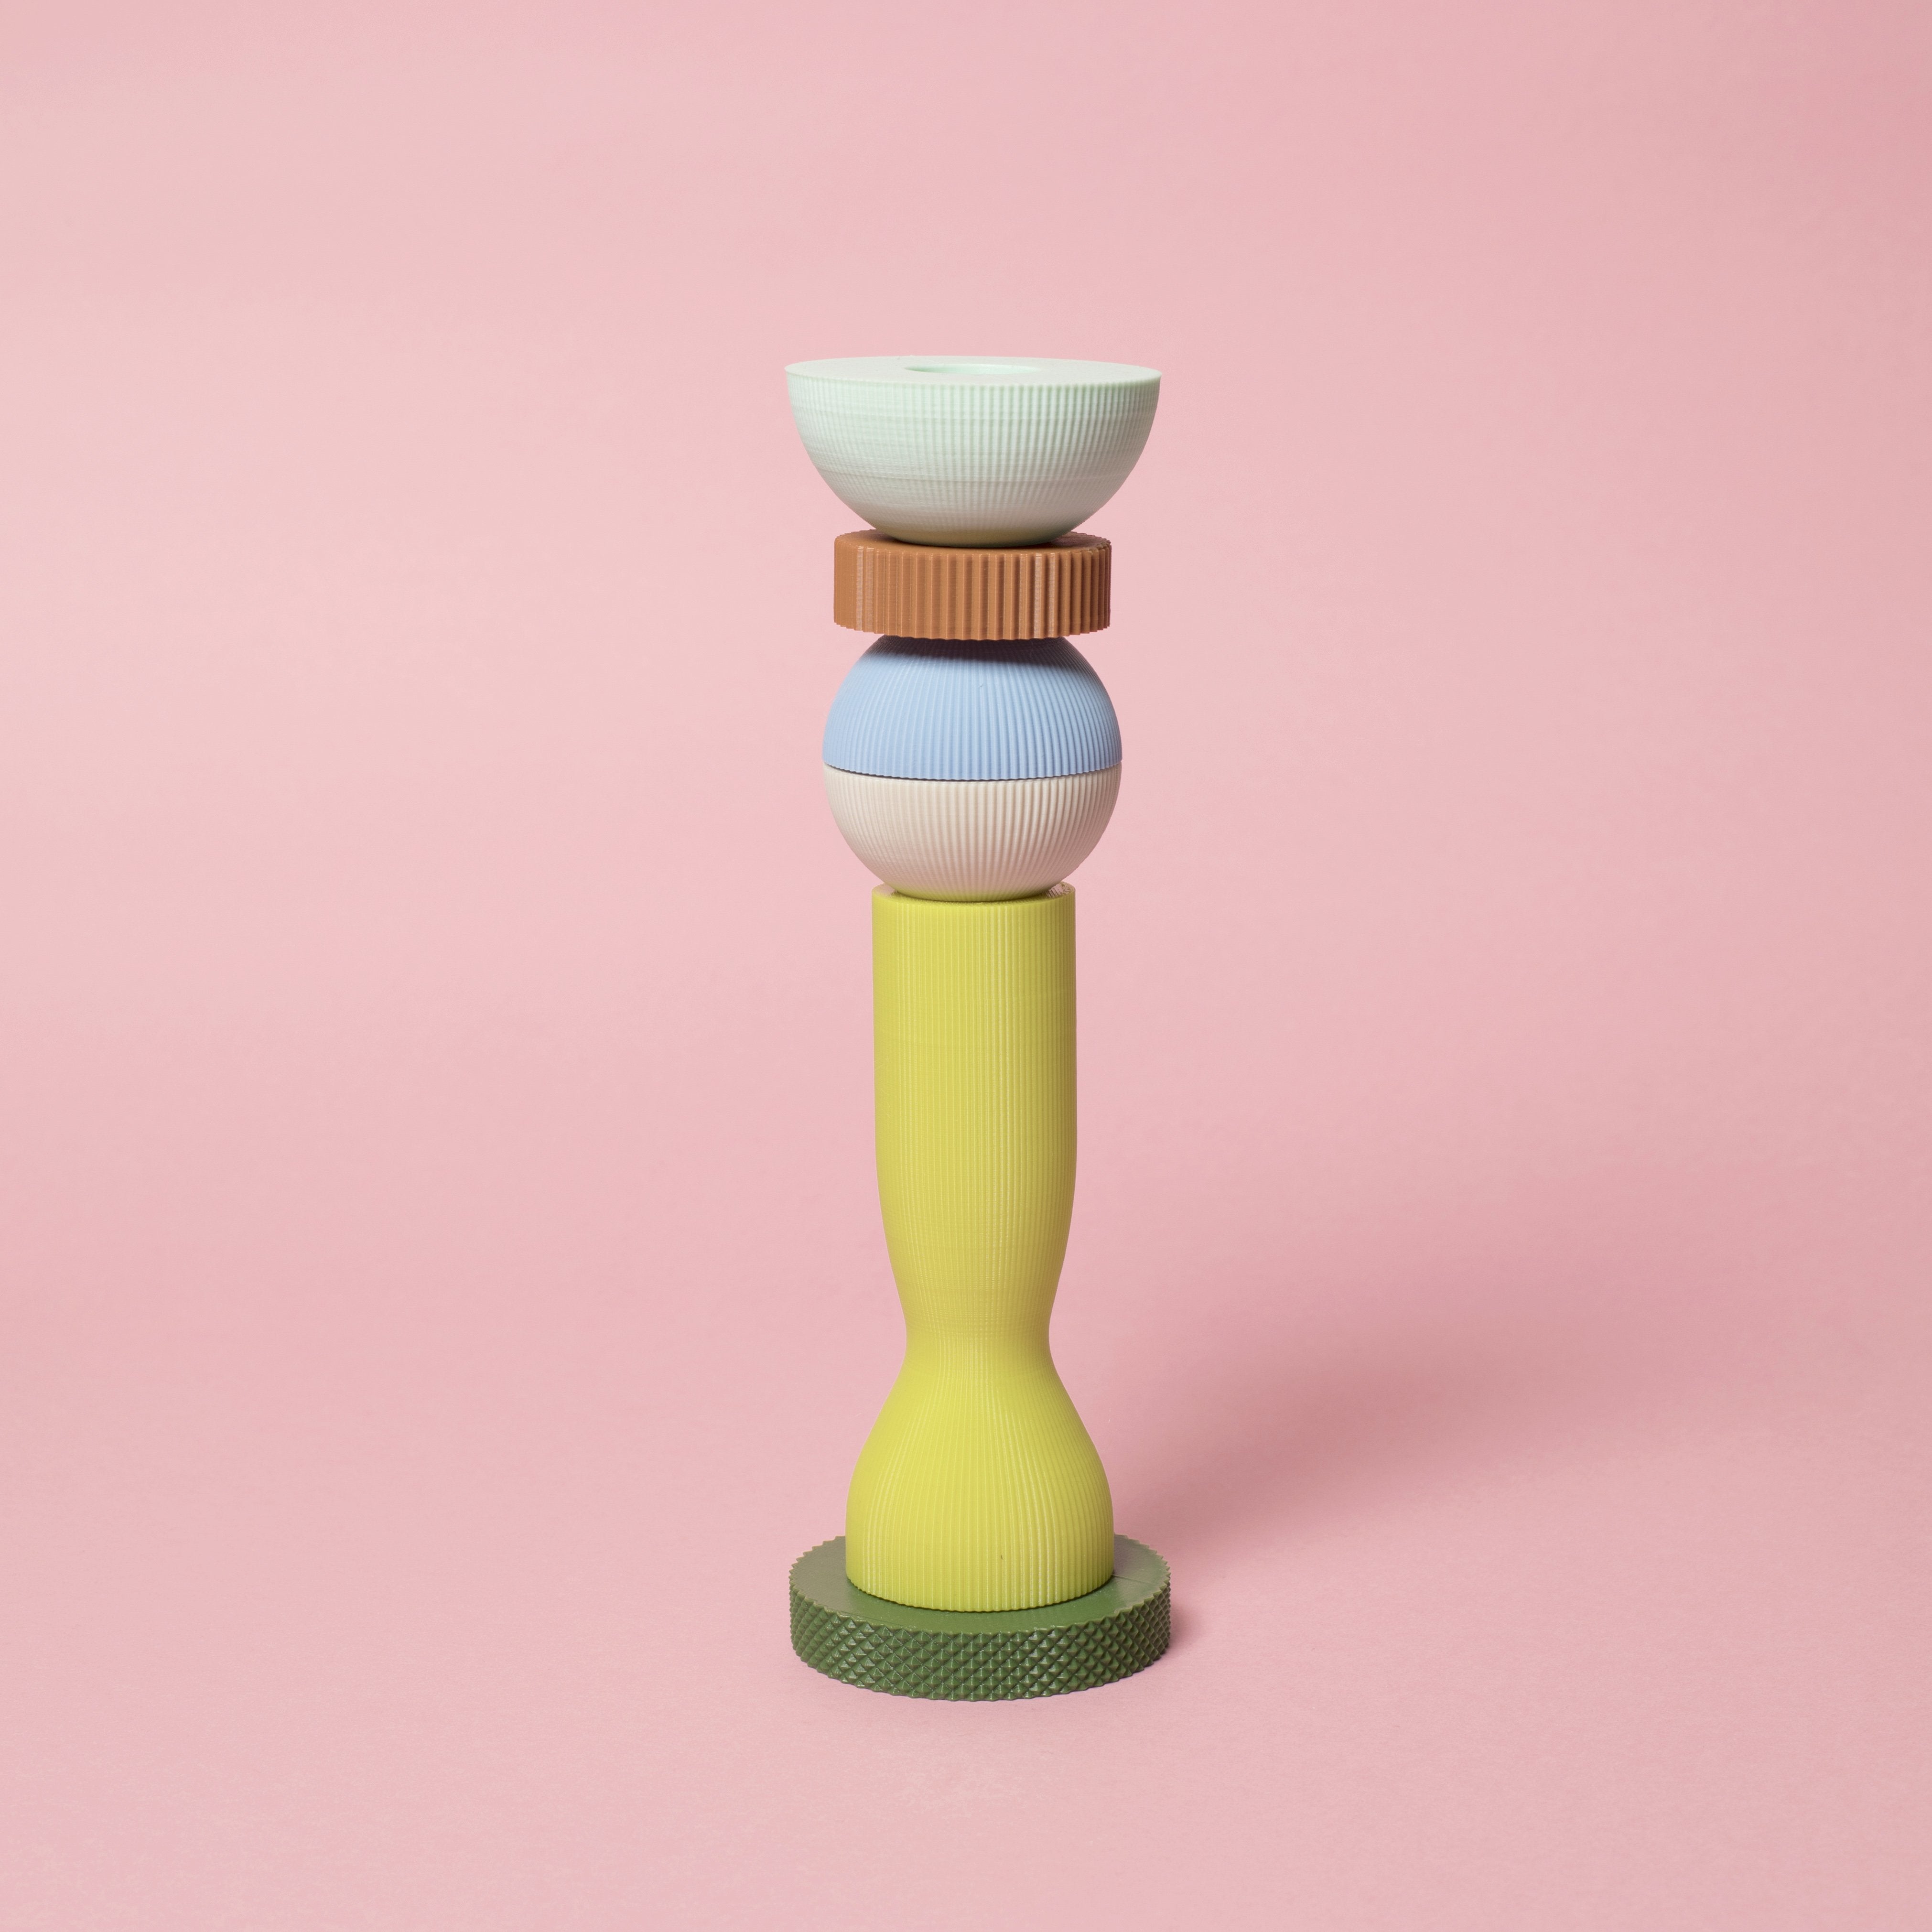 The Cool French Concept Shop That’s Making Us Want a Fleet of $48 Candlesticks